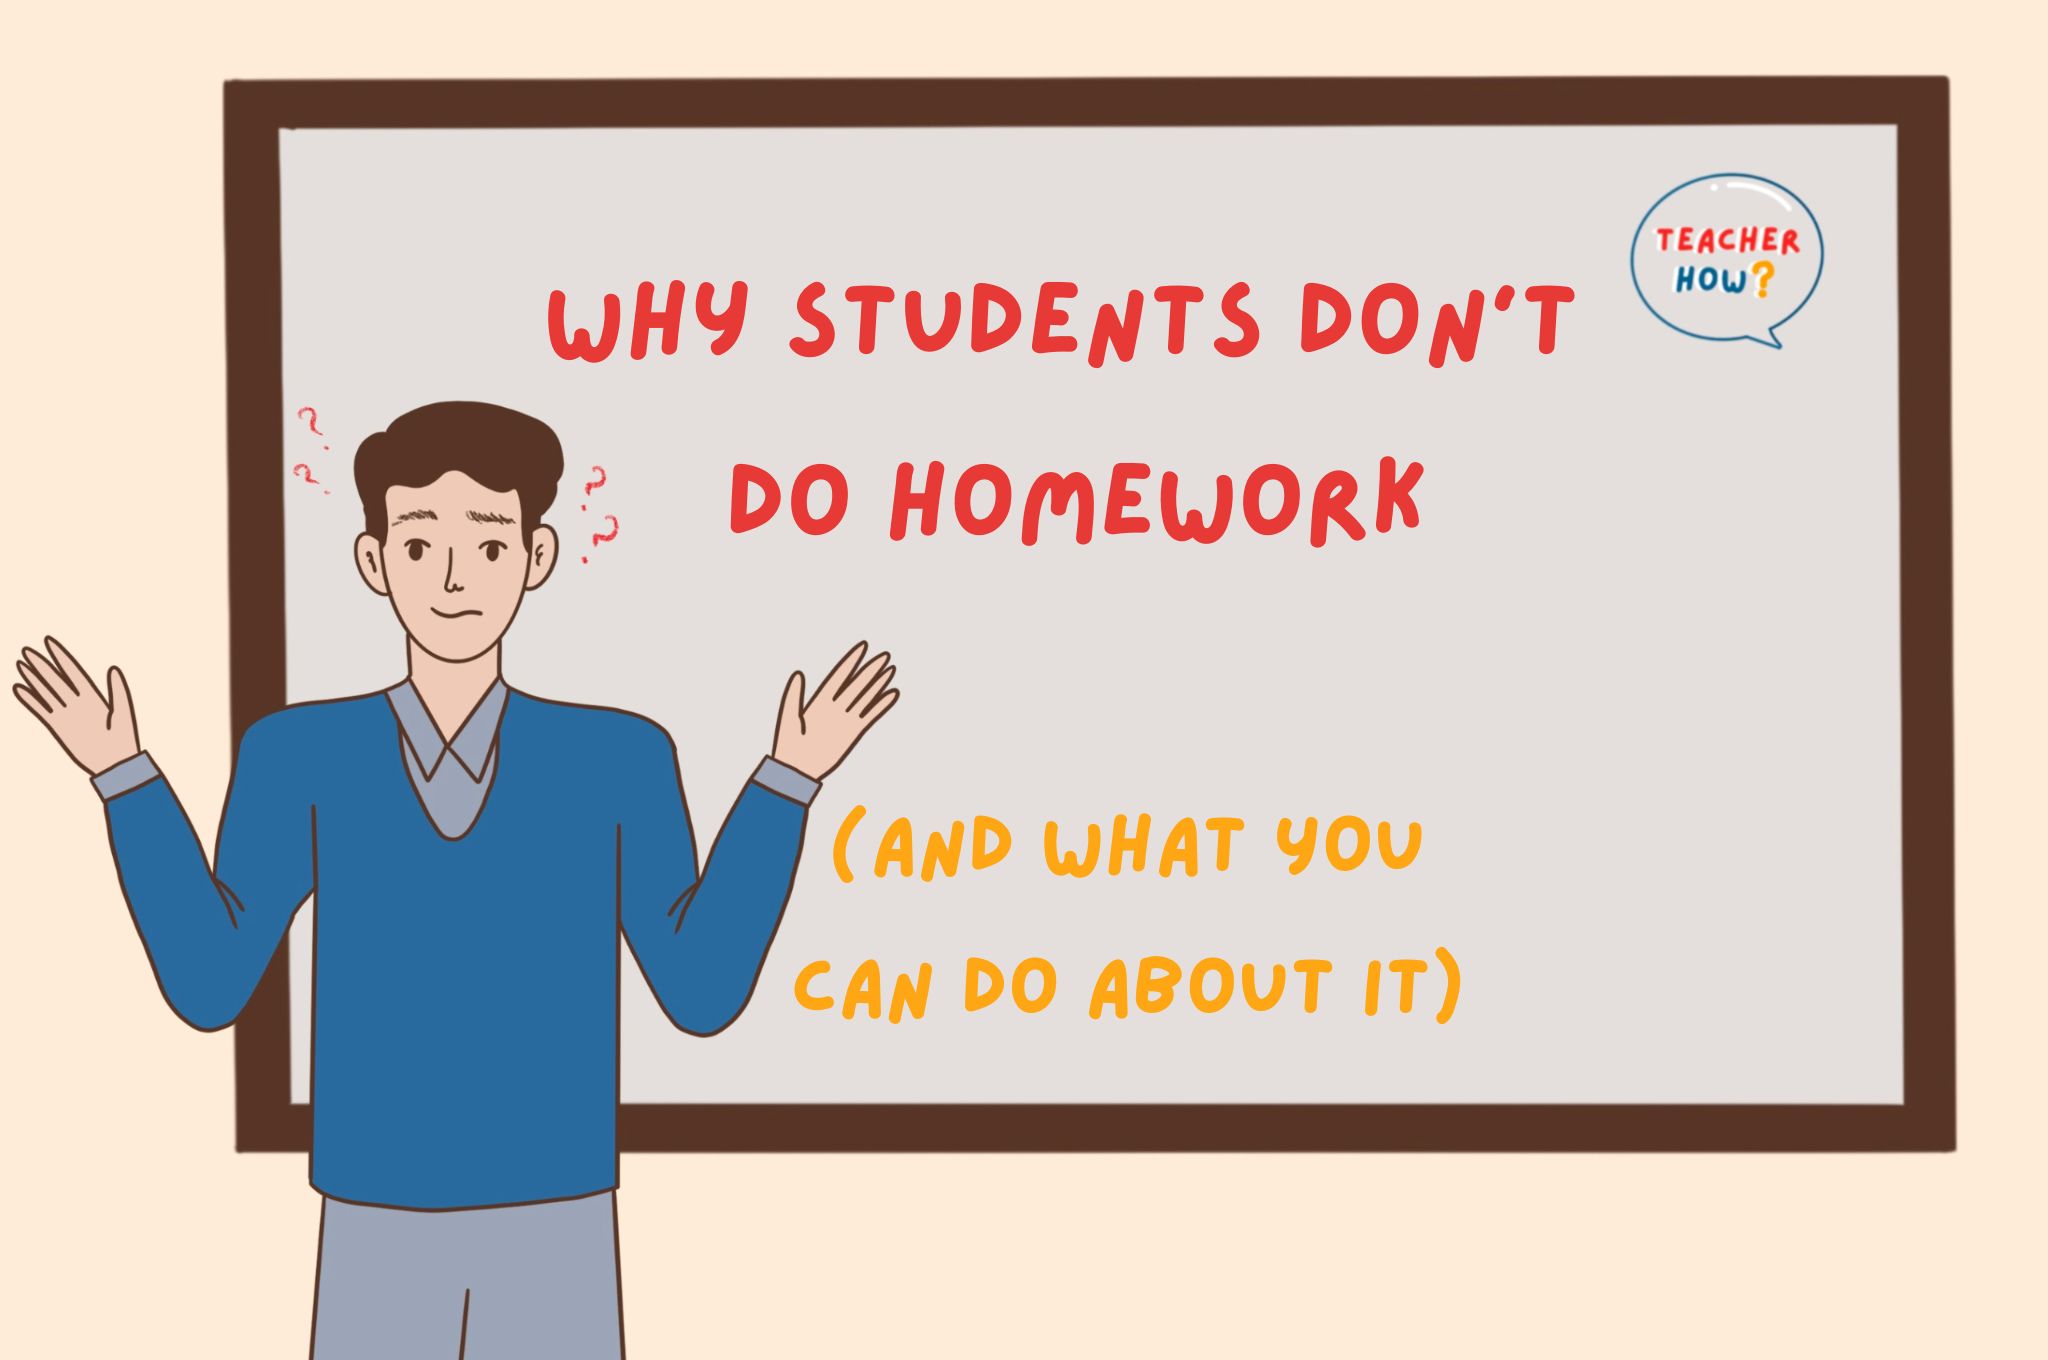 why don't students do their homework